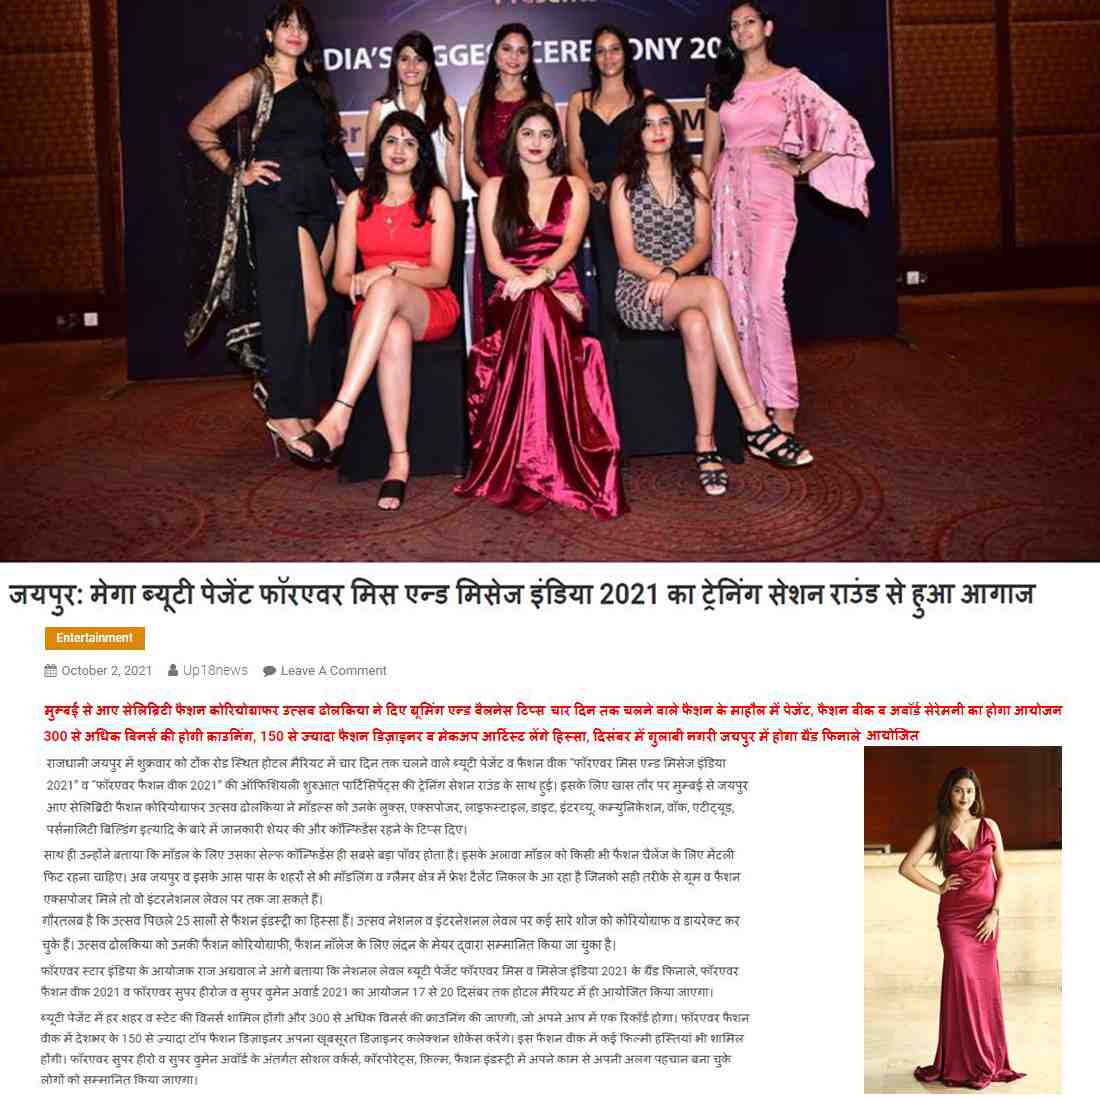 Beauty Pageant in India : Utsav Dholakia The Fashion Choreographer has Trained Participants of Forever Miss India and Mrs India 2021